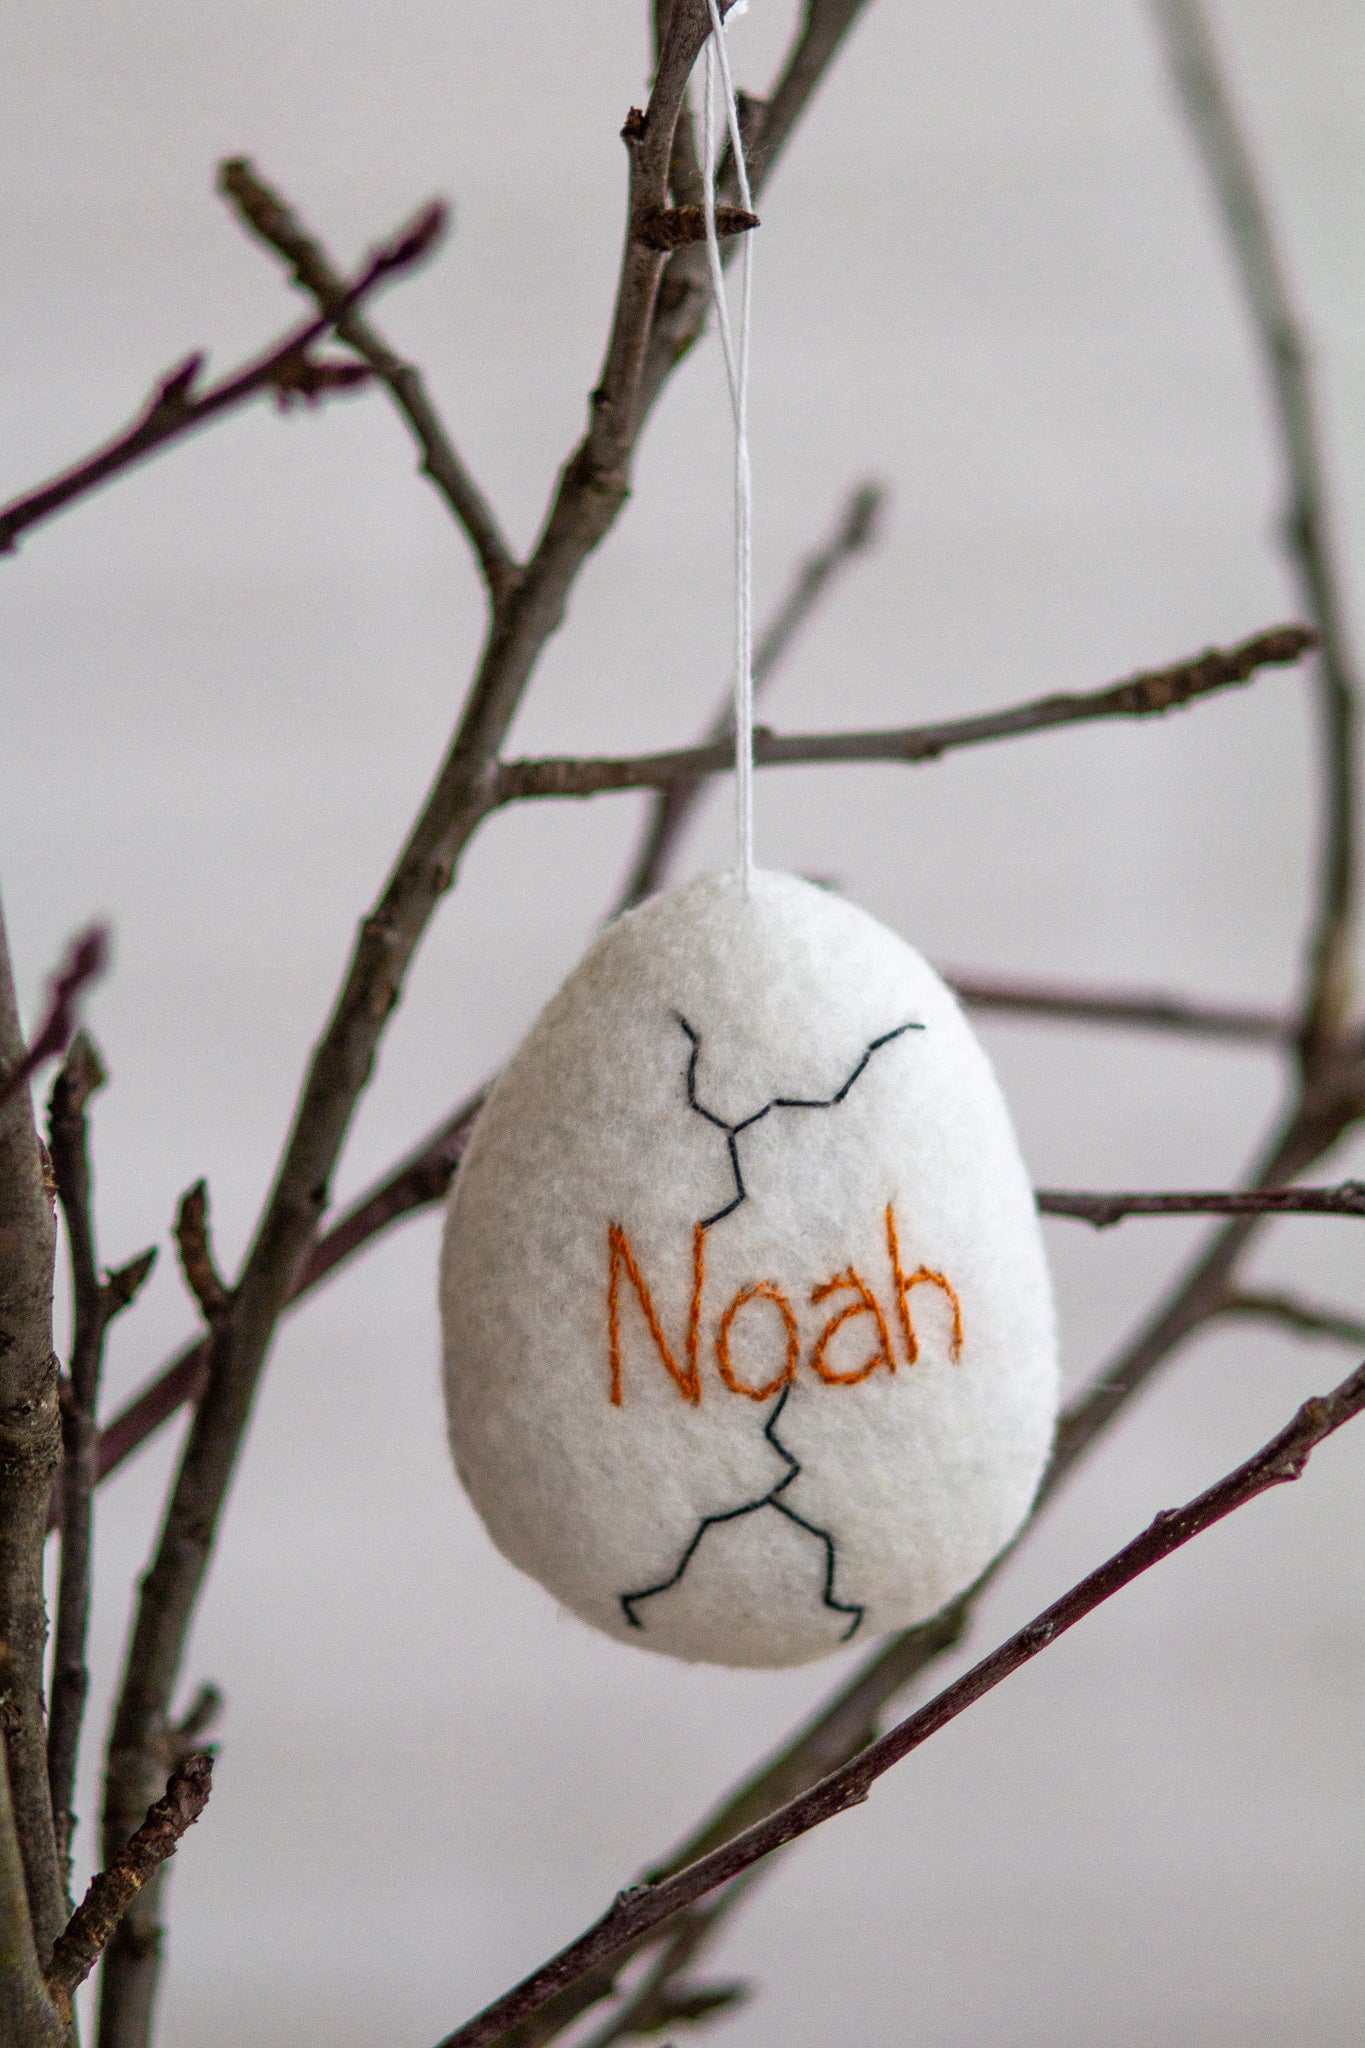 Egg Hatchling Ornament with Adorable Chicks and Fun Details